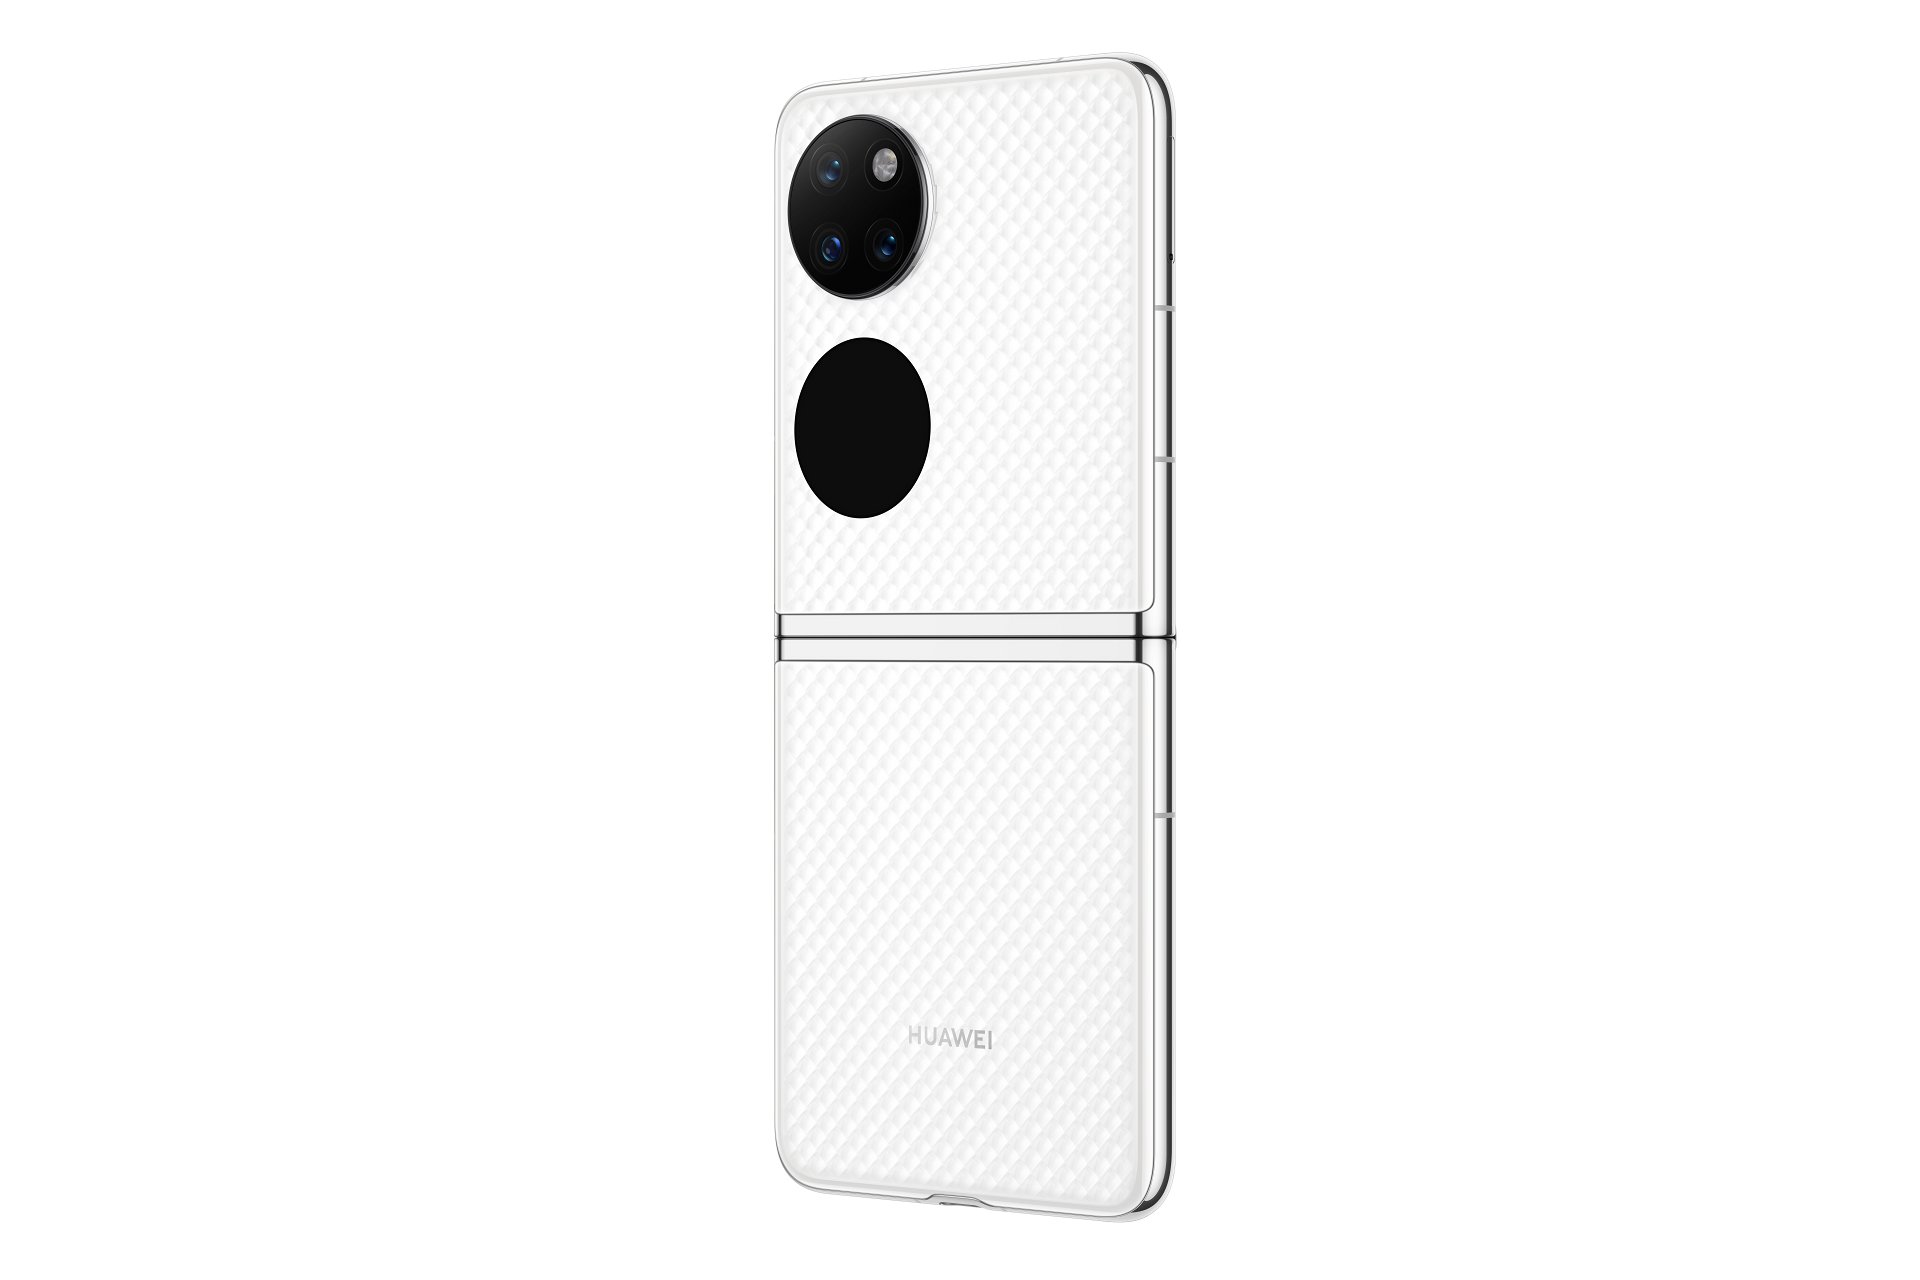 mkt-huawei-p50-pocket-product-image-hq-white-rear-30-left-expand-wallpaper.jpg